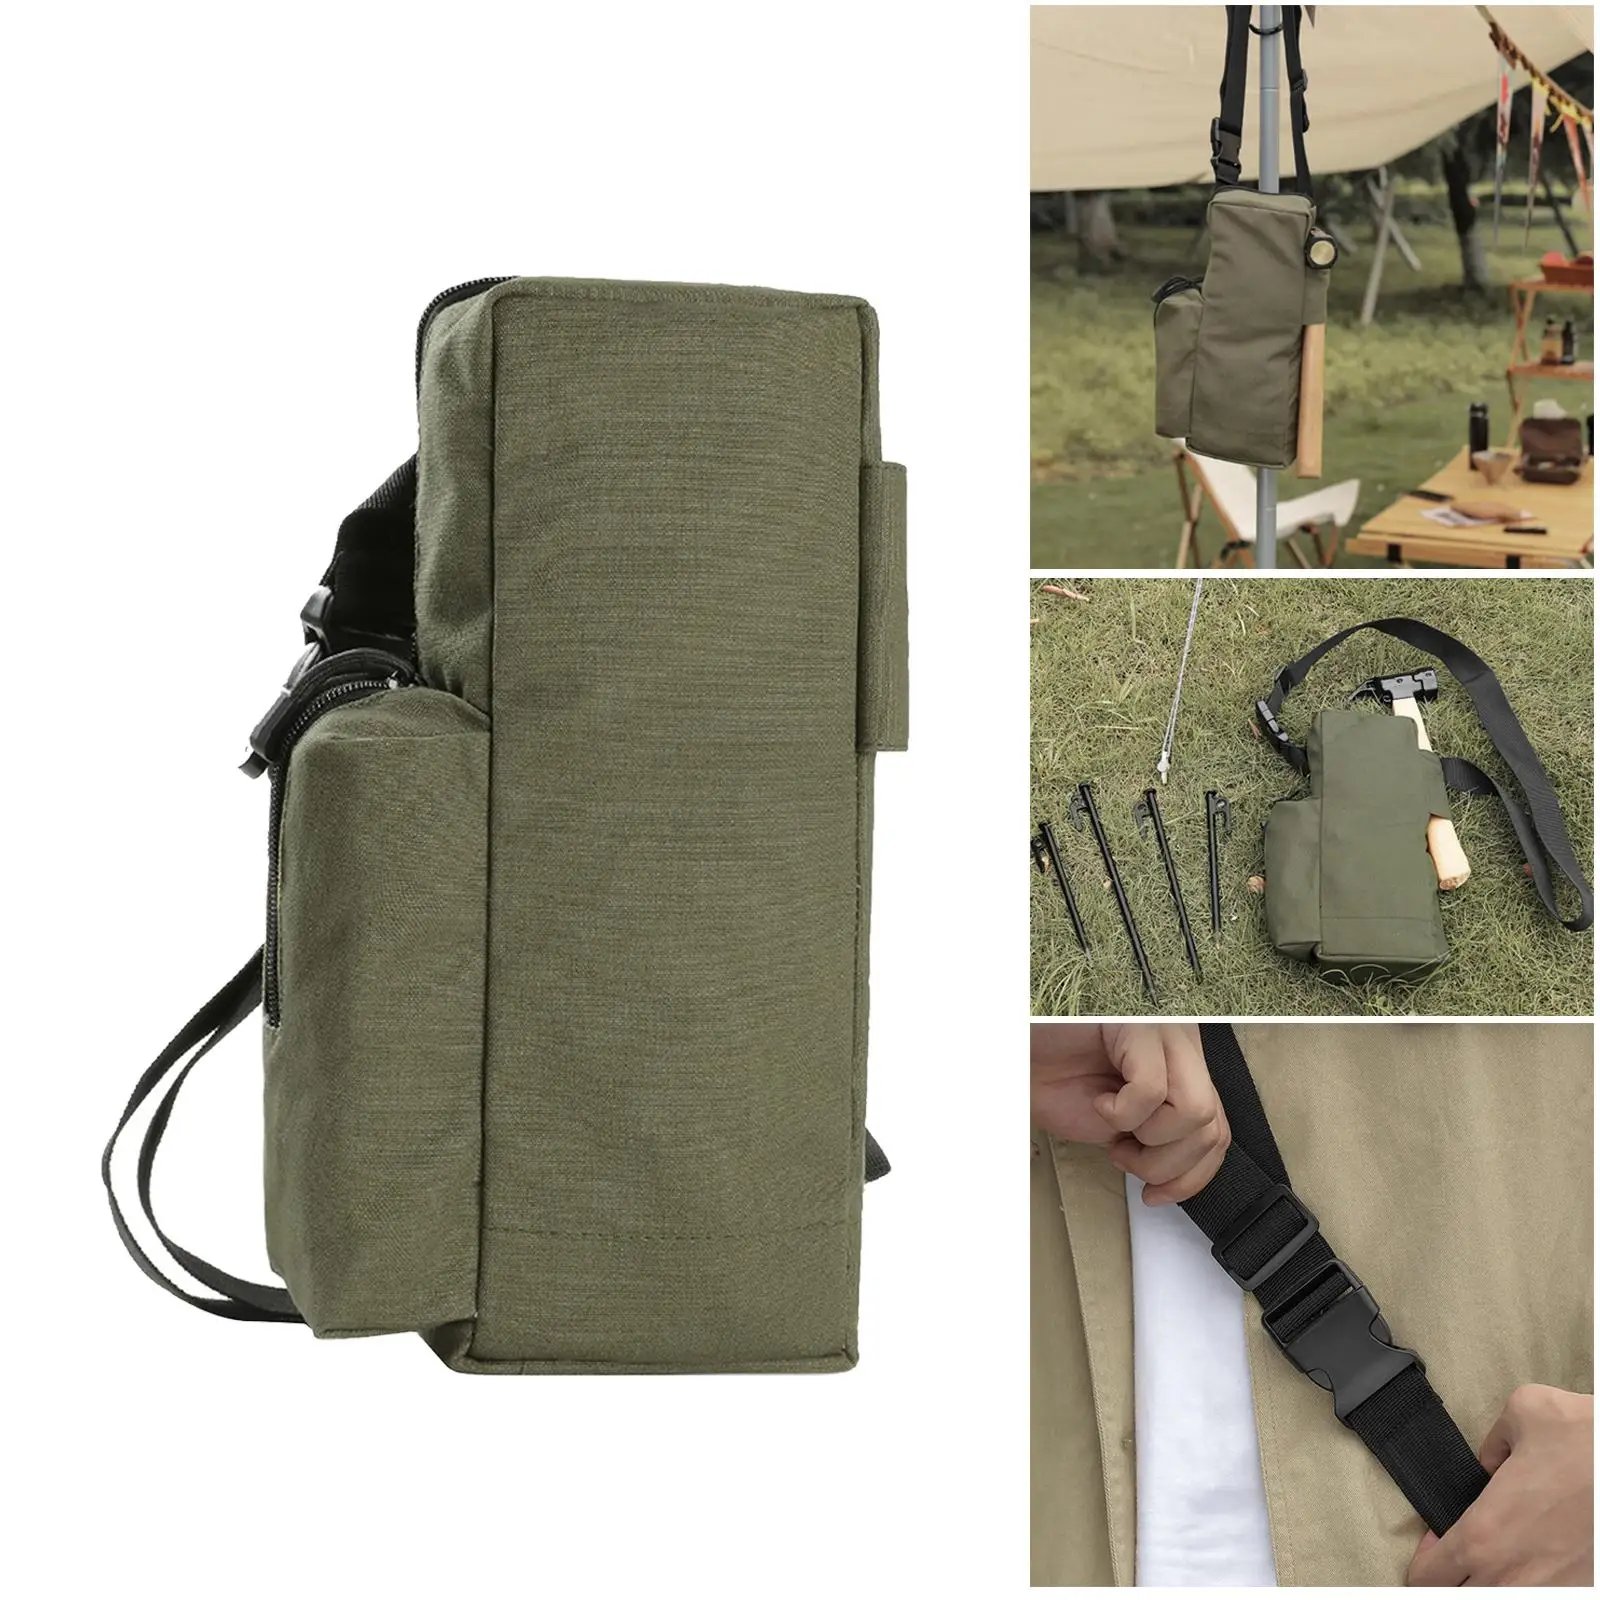 Portable Tent Peg Bag Tent Nails Organizer Case Holder Pouch Outdoor Camping Hiking Accessories